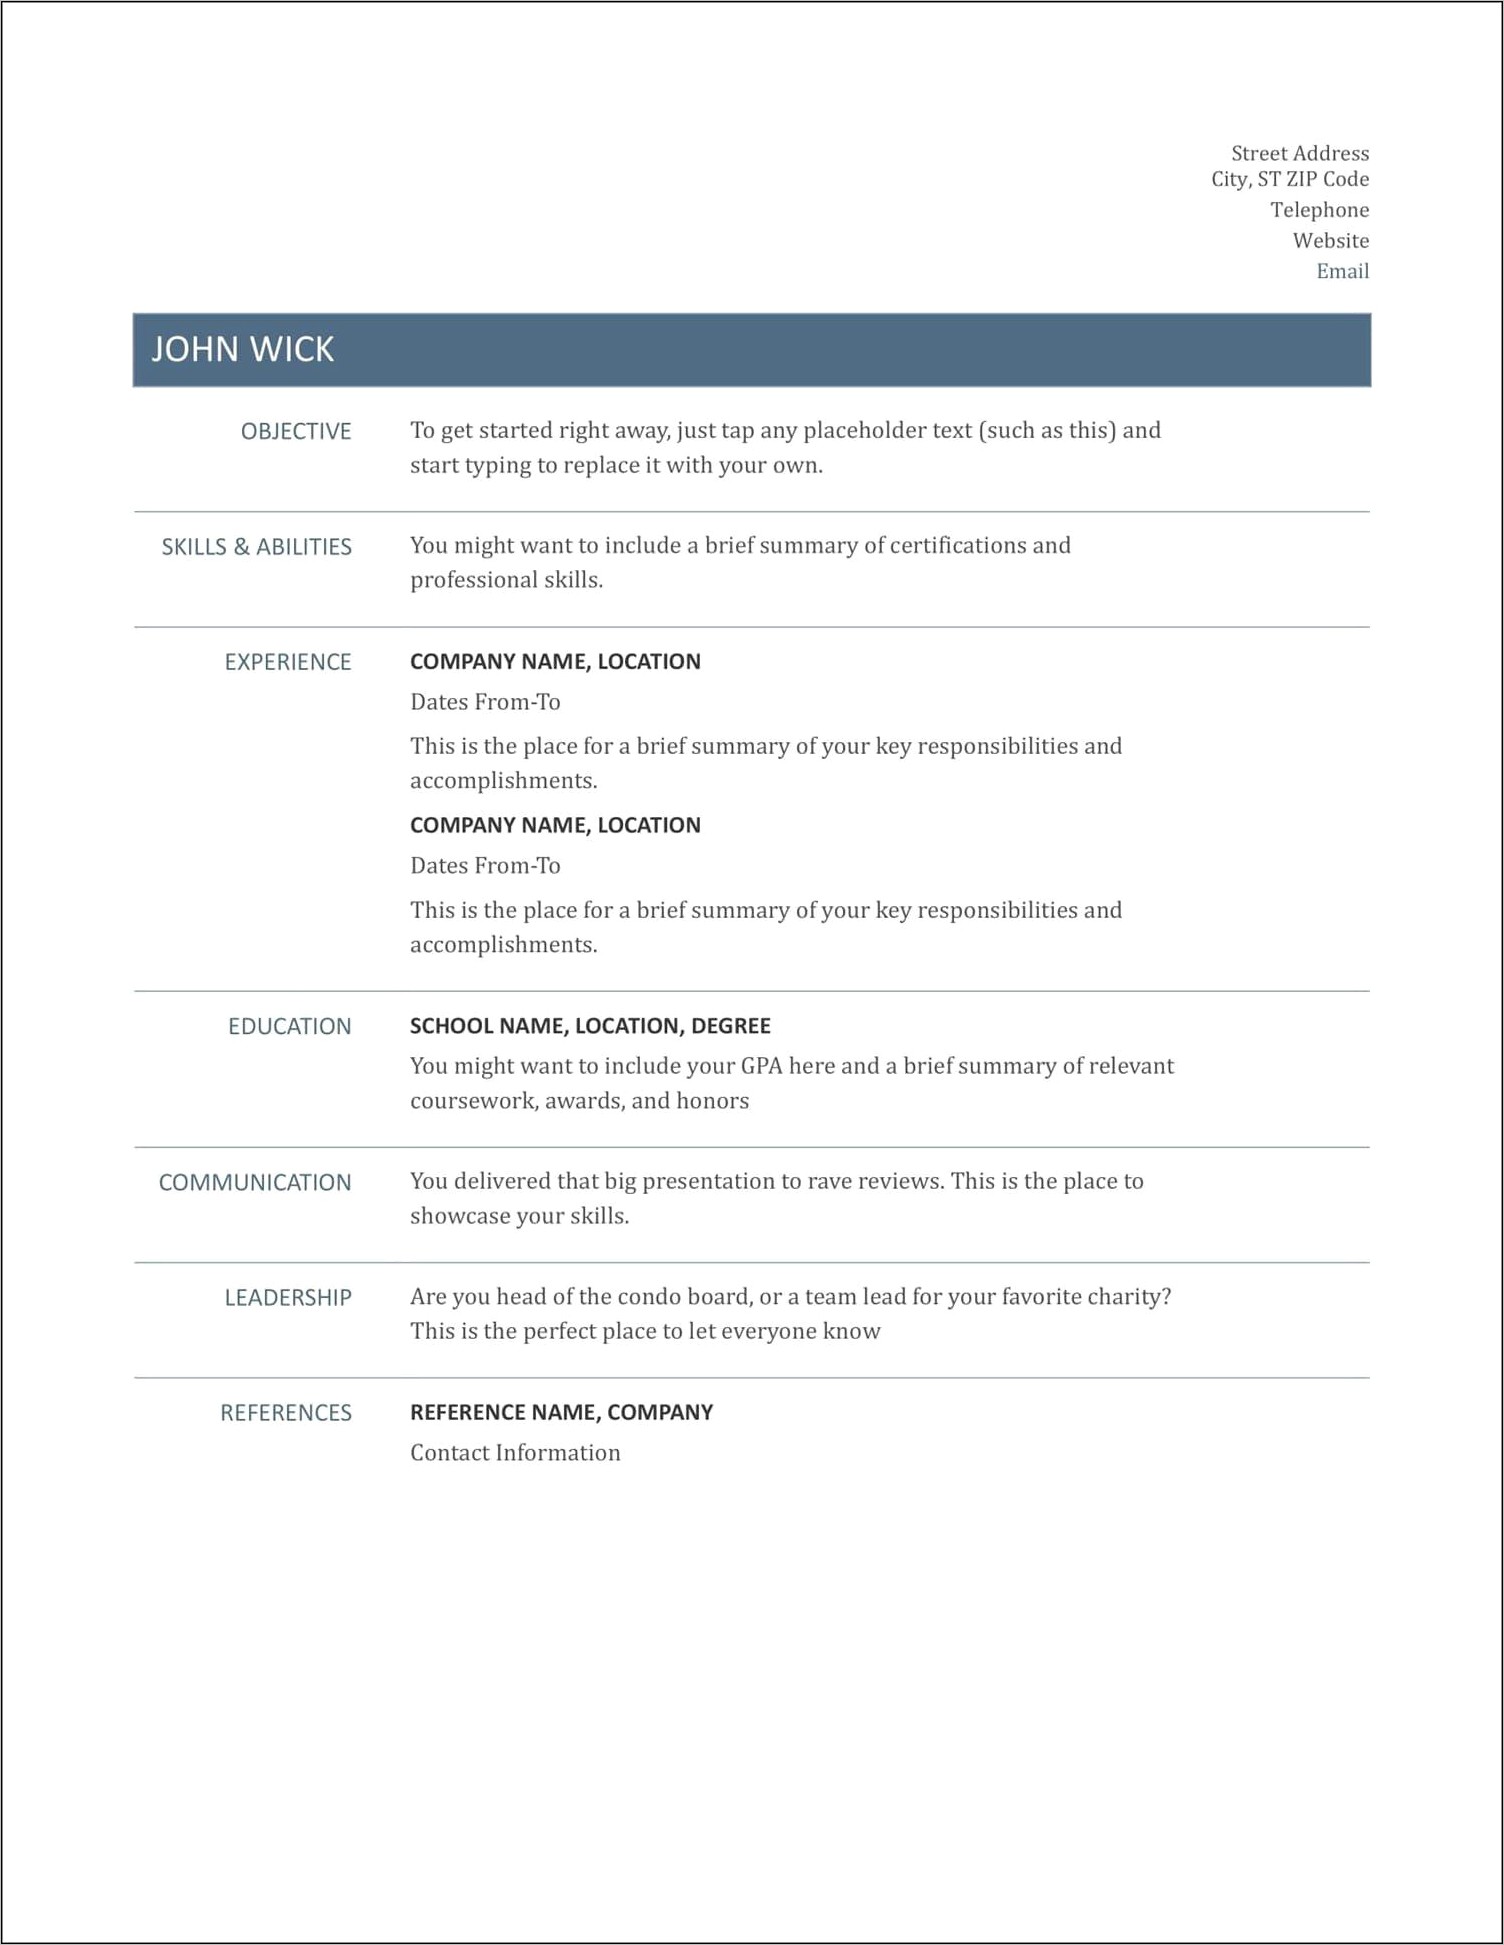 Free Resume Templates Download India